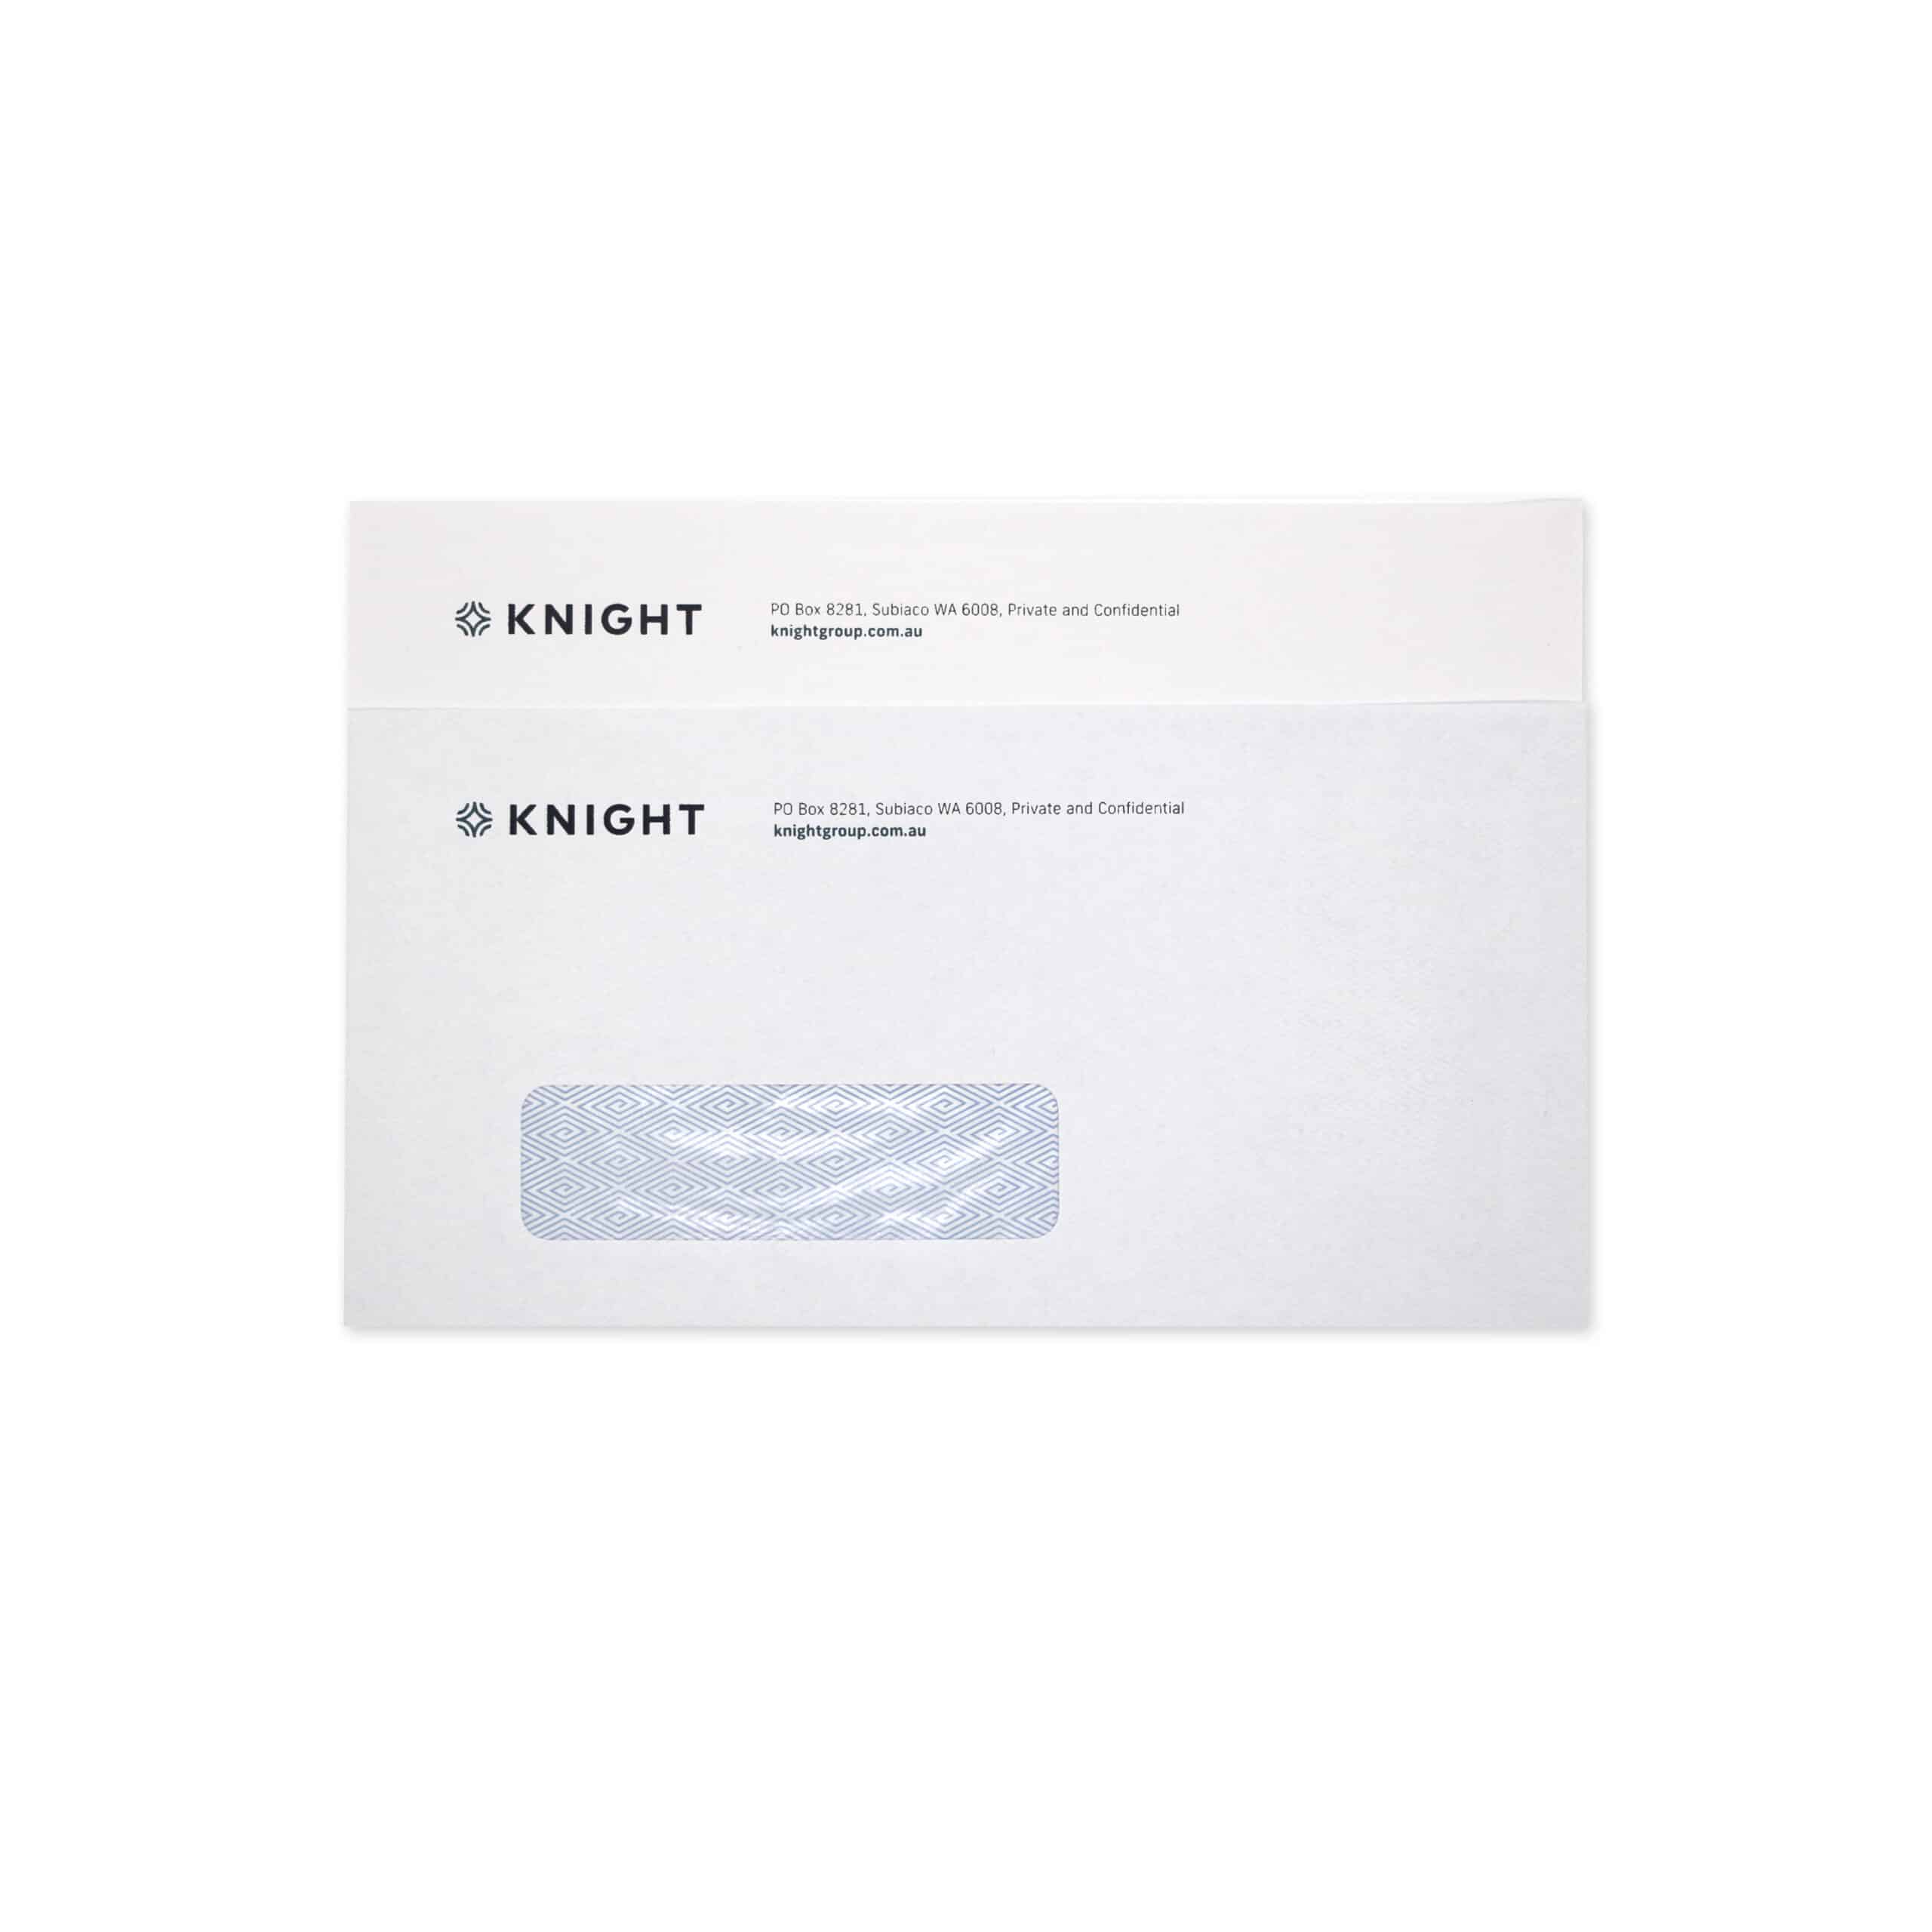 knight personalised envelopes